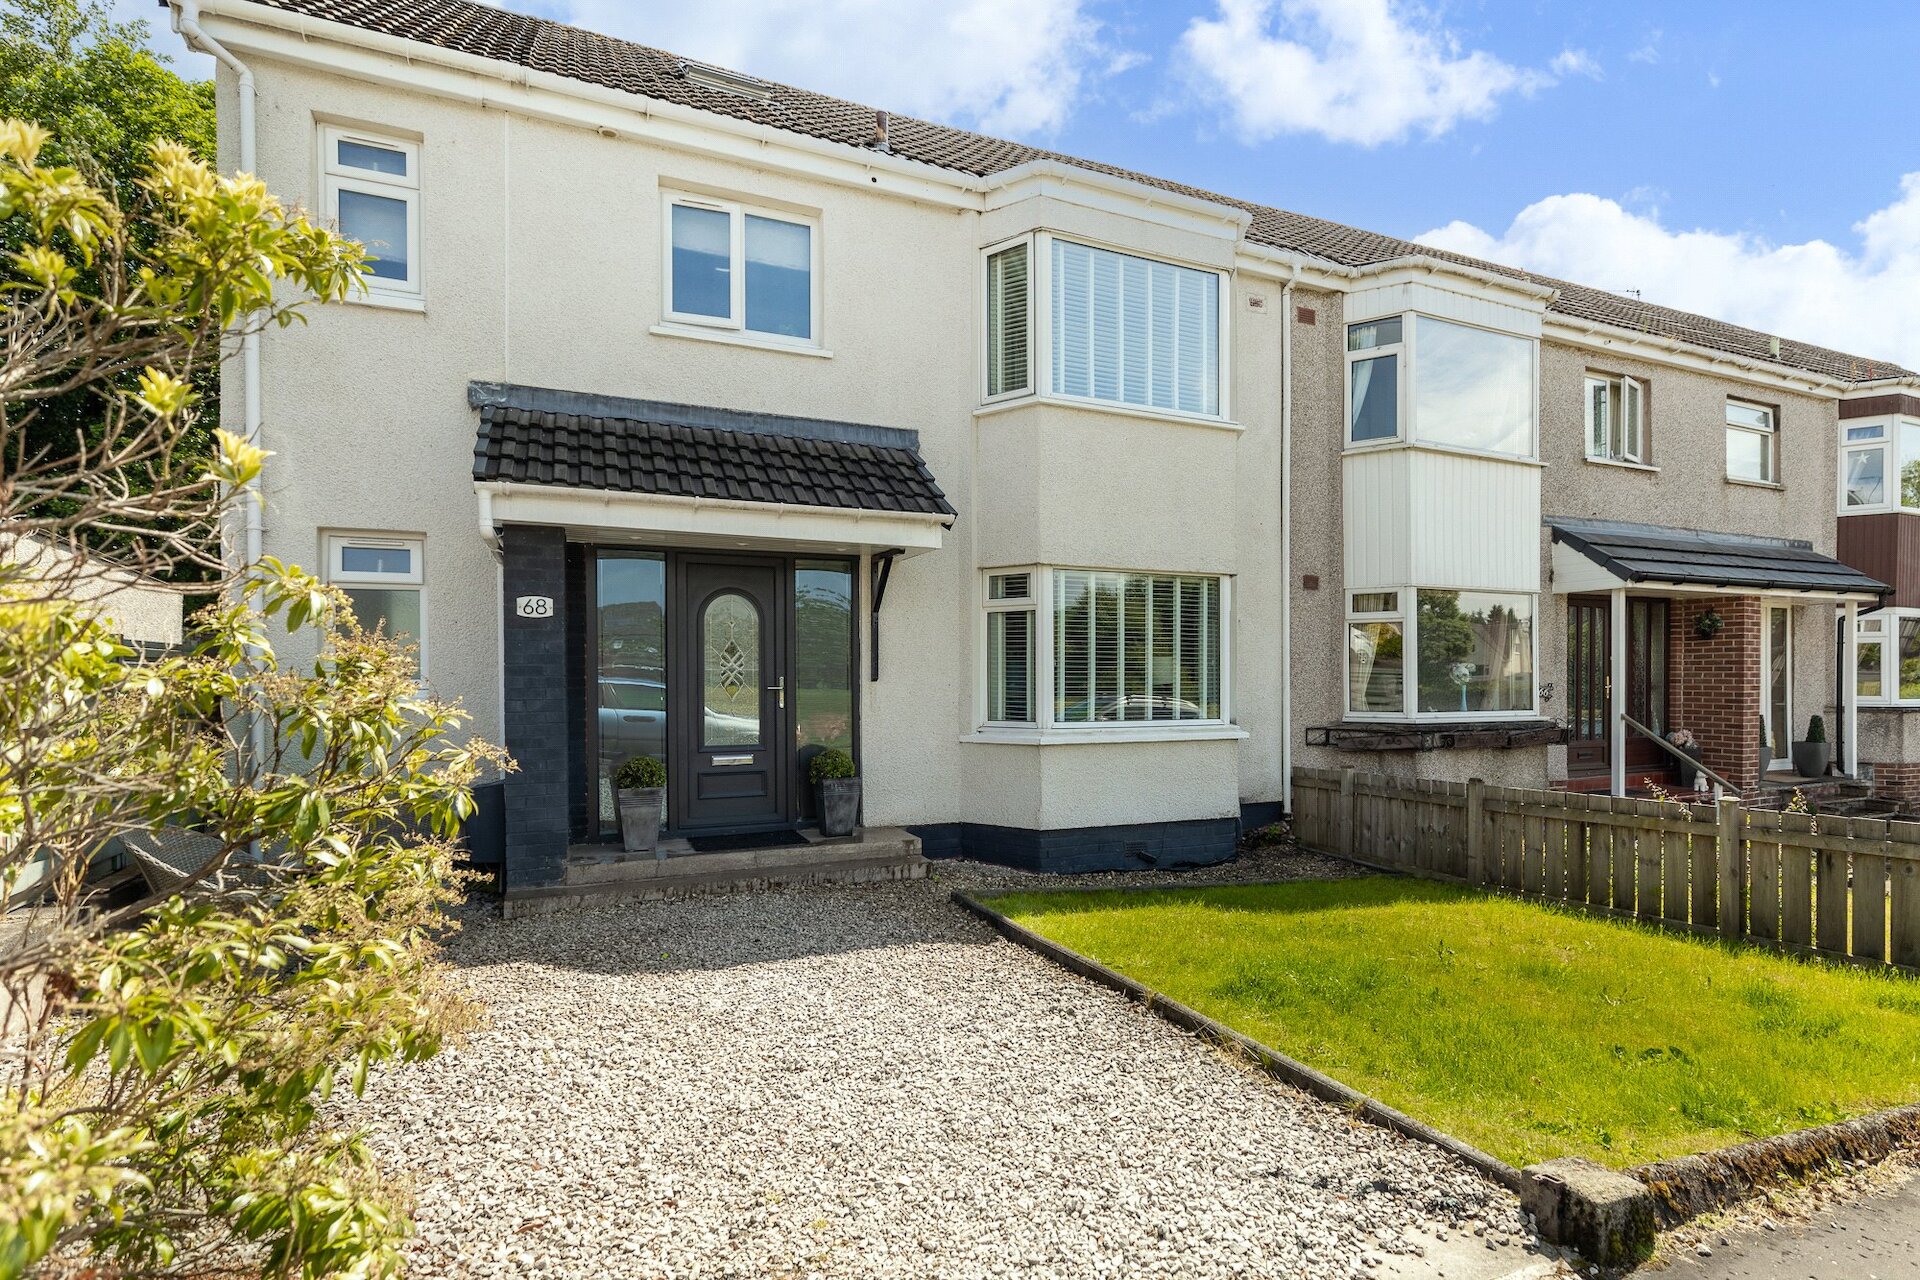 68 Golf View, Bearsden, Glasgow, G61 4HH - Picture #1